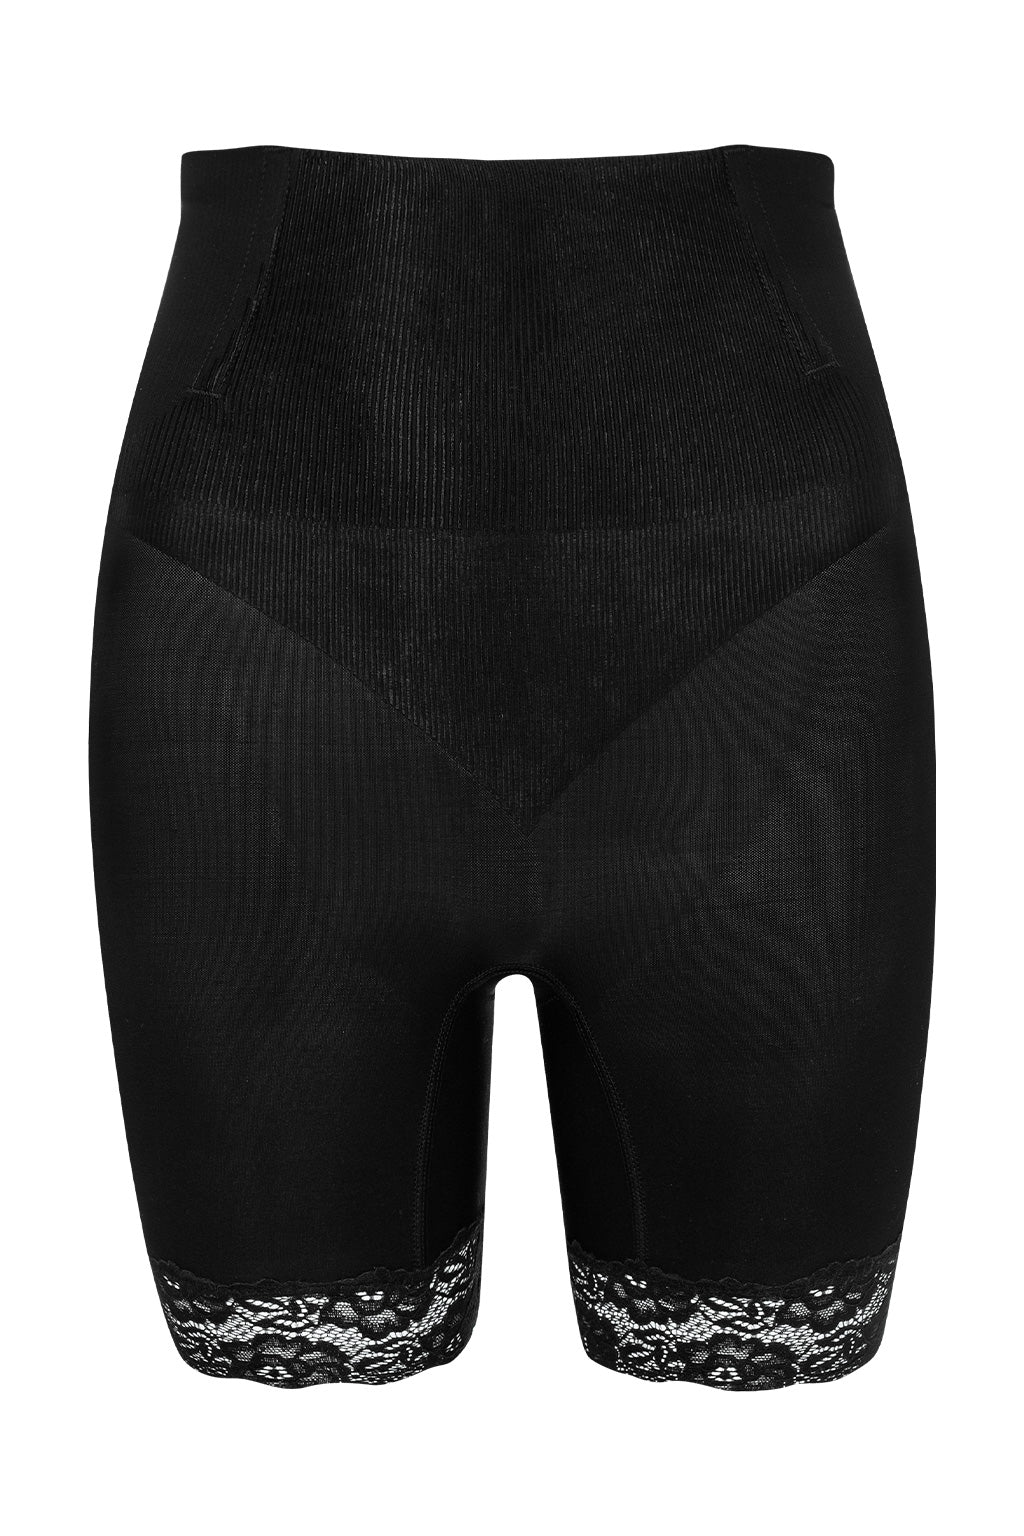 Shapewear For Women High Waisted Butt Lifter Panties Compression Shorts Postpartum  Underwear Waist Train (Black, S) at  Women's Clothing store